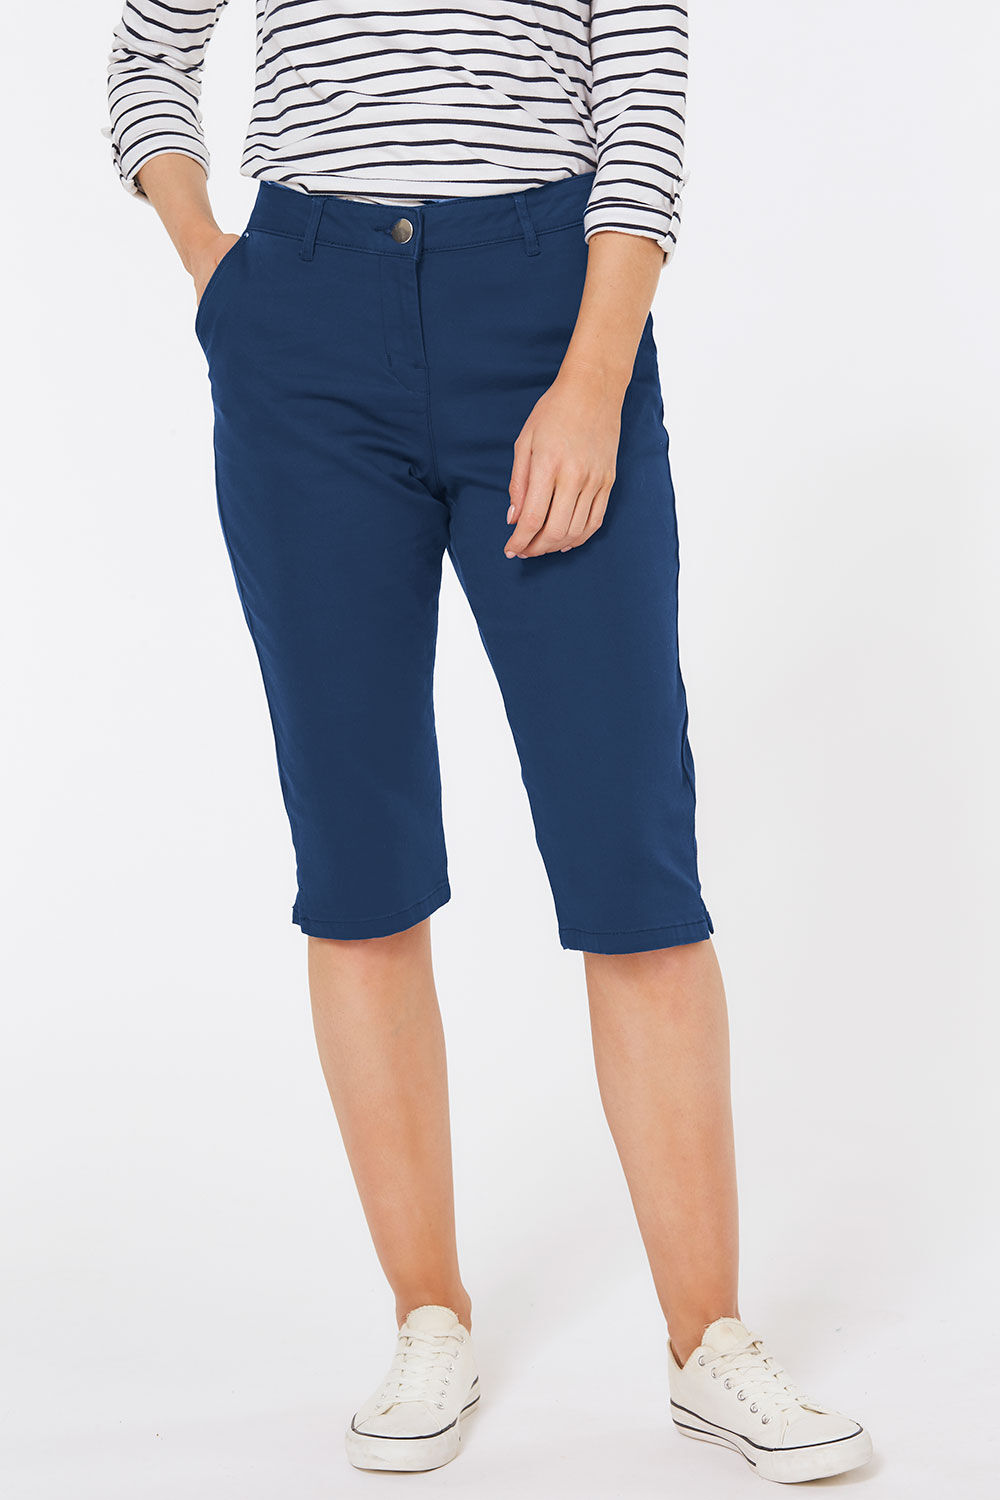 Womens High Waisted Skinny Pedal Pushers Trousers